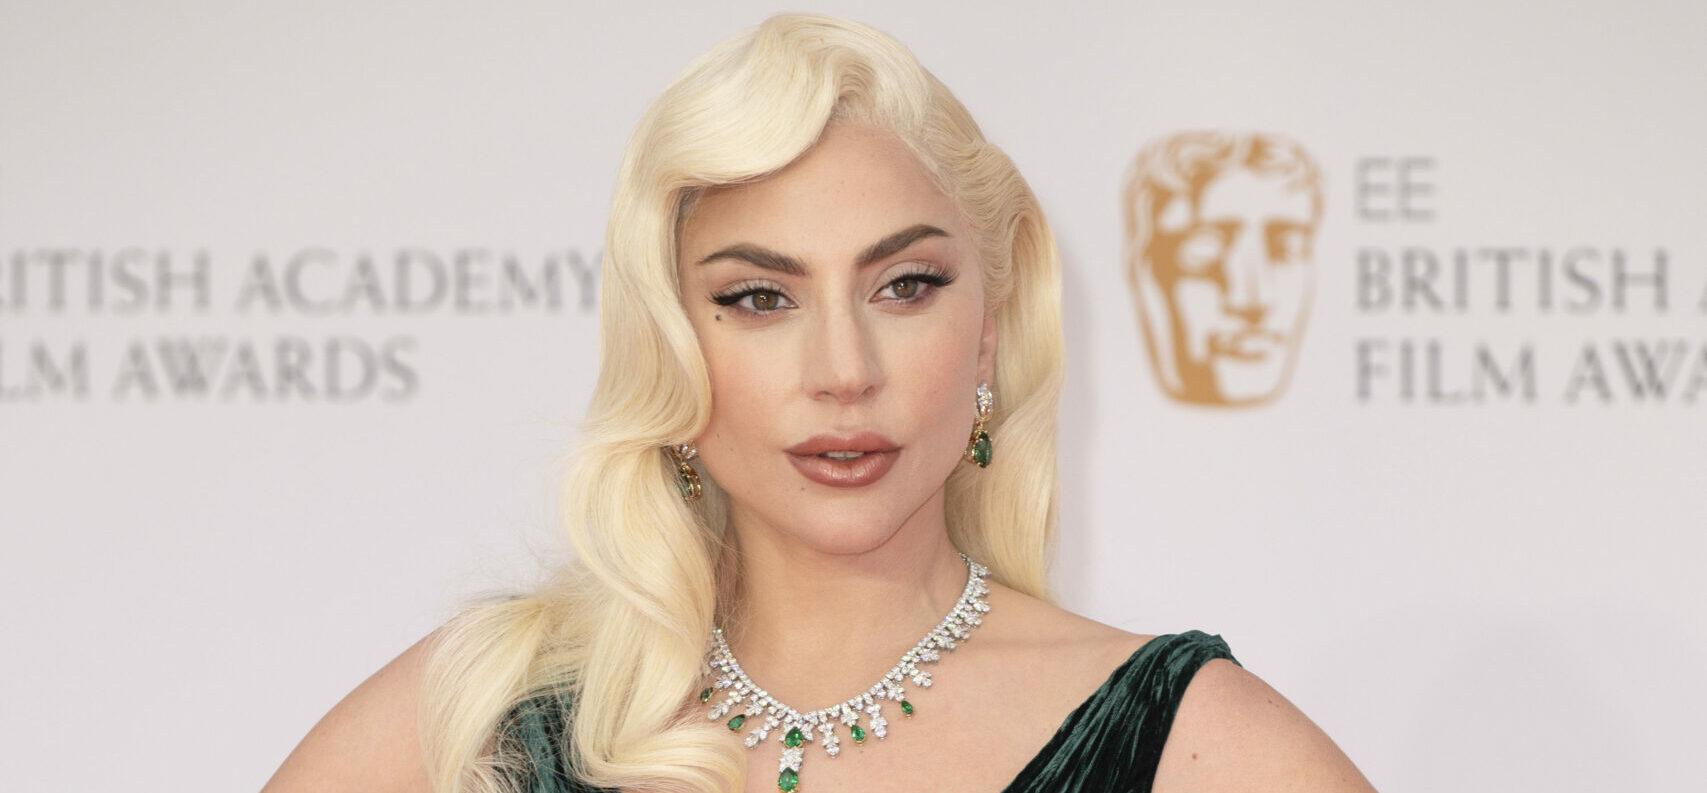 Dog Theft Accomplice Takes Lady Gaga To Court For Not Honoring $500K Reward